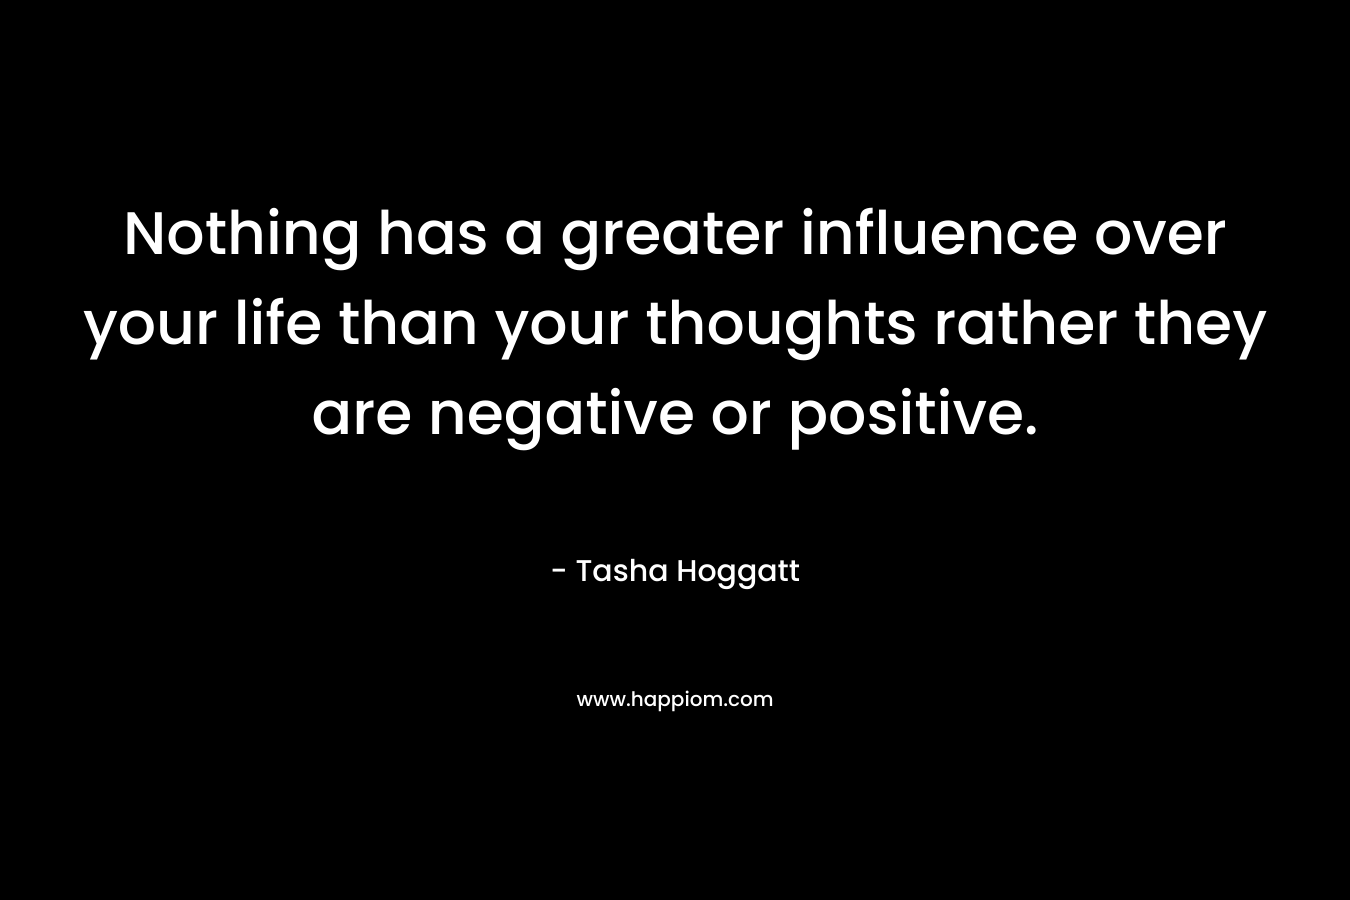 Nothing has a greater influence over your life than your thoughts rather they are negative or positive.